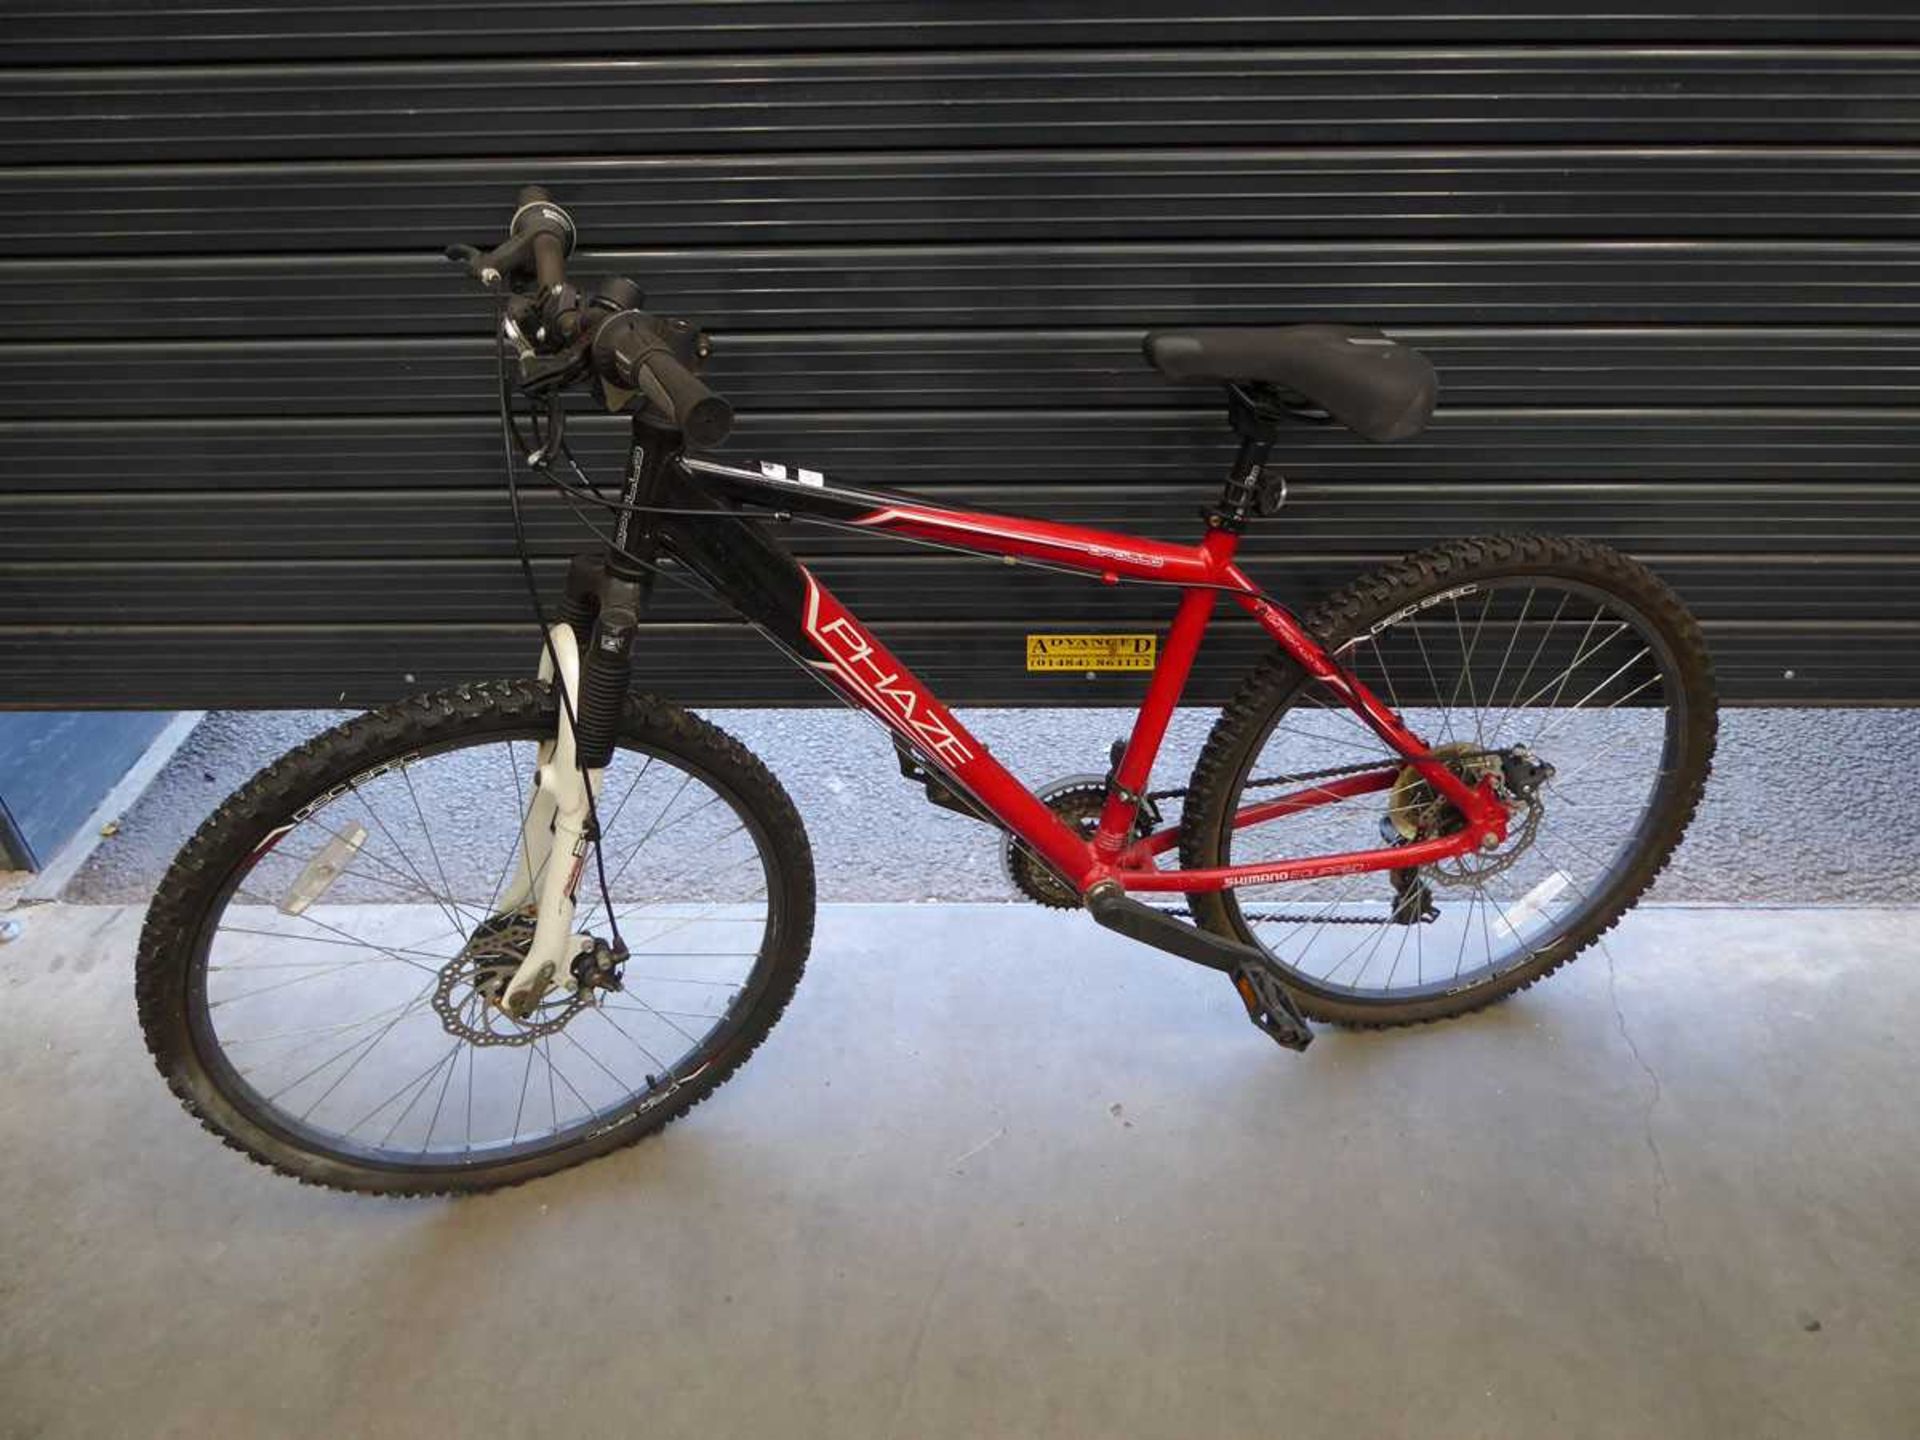 Black and red phase mountain bike